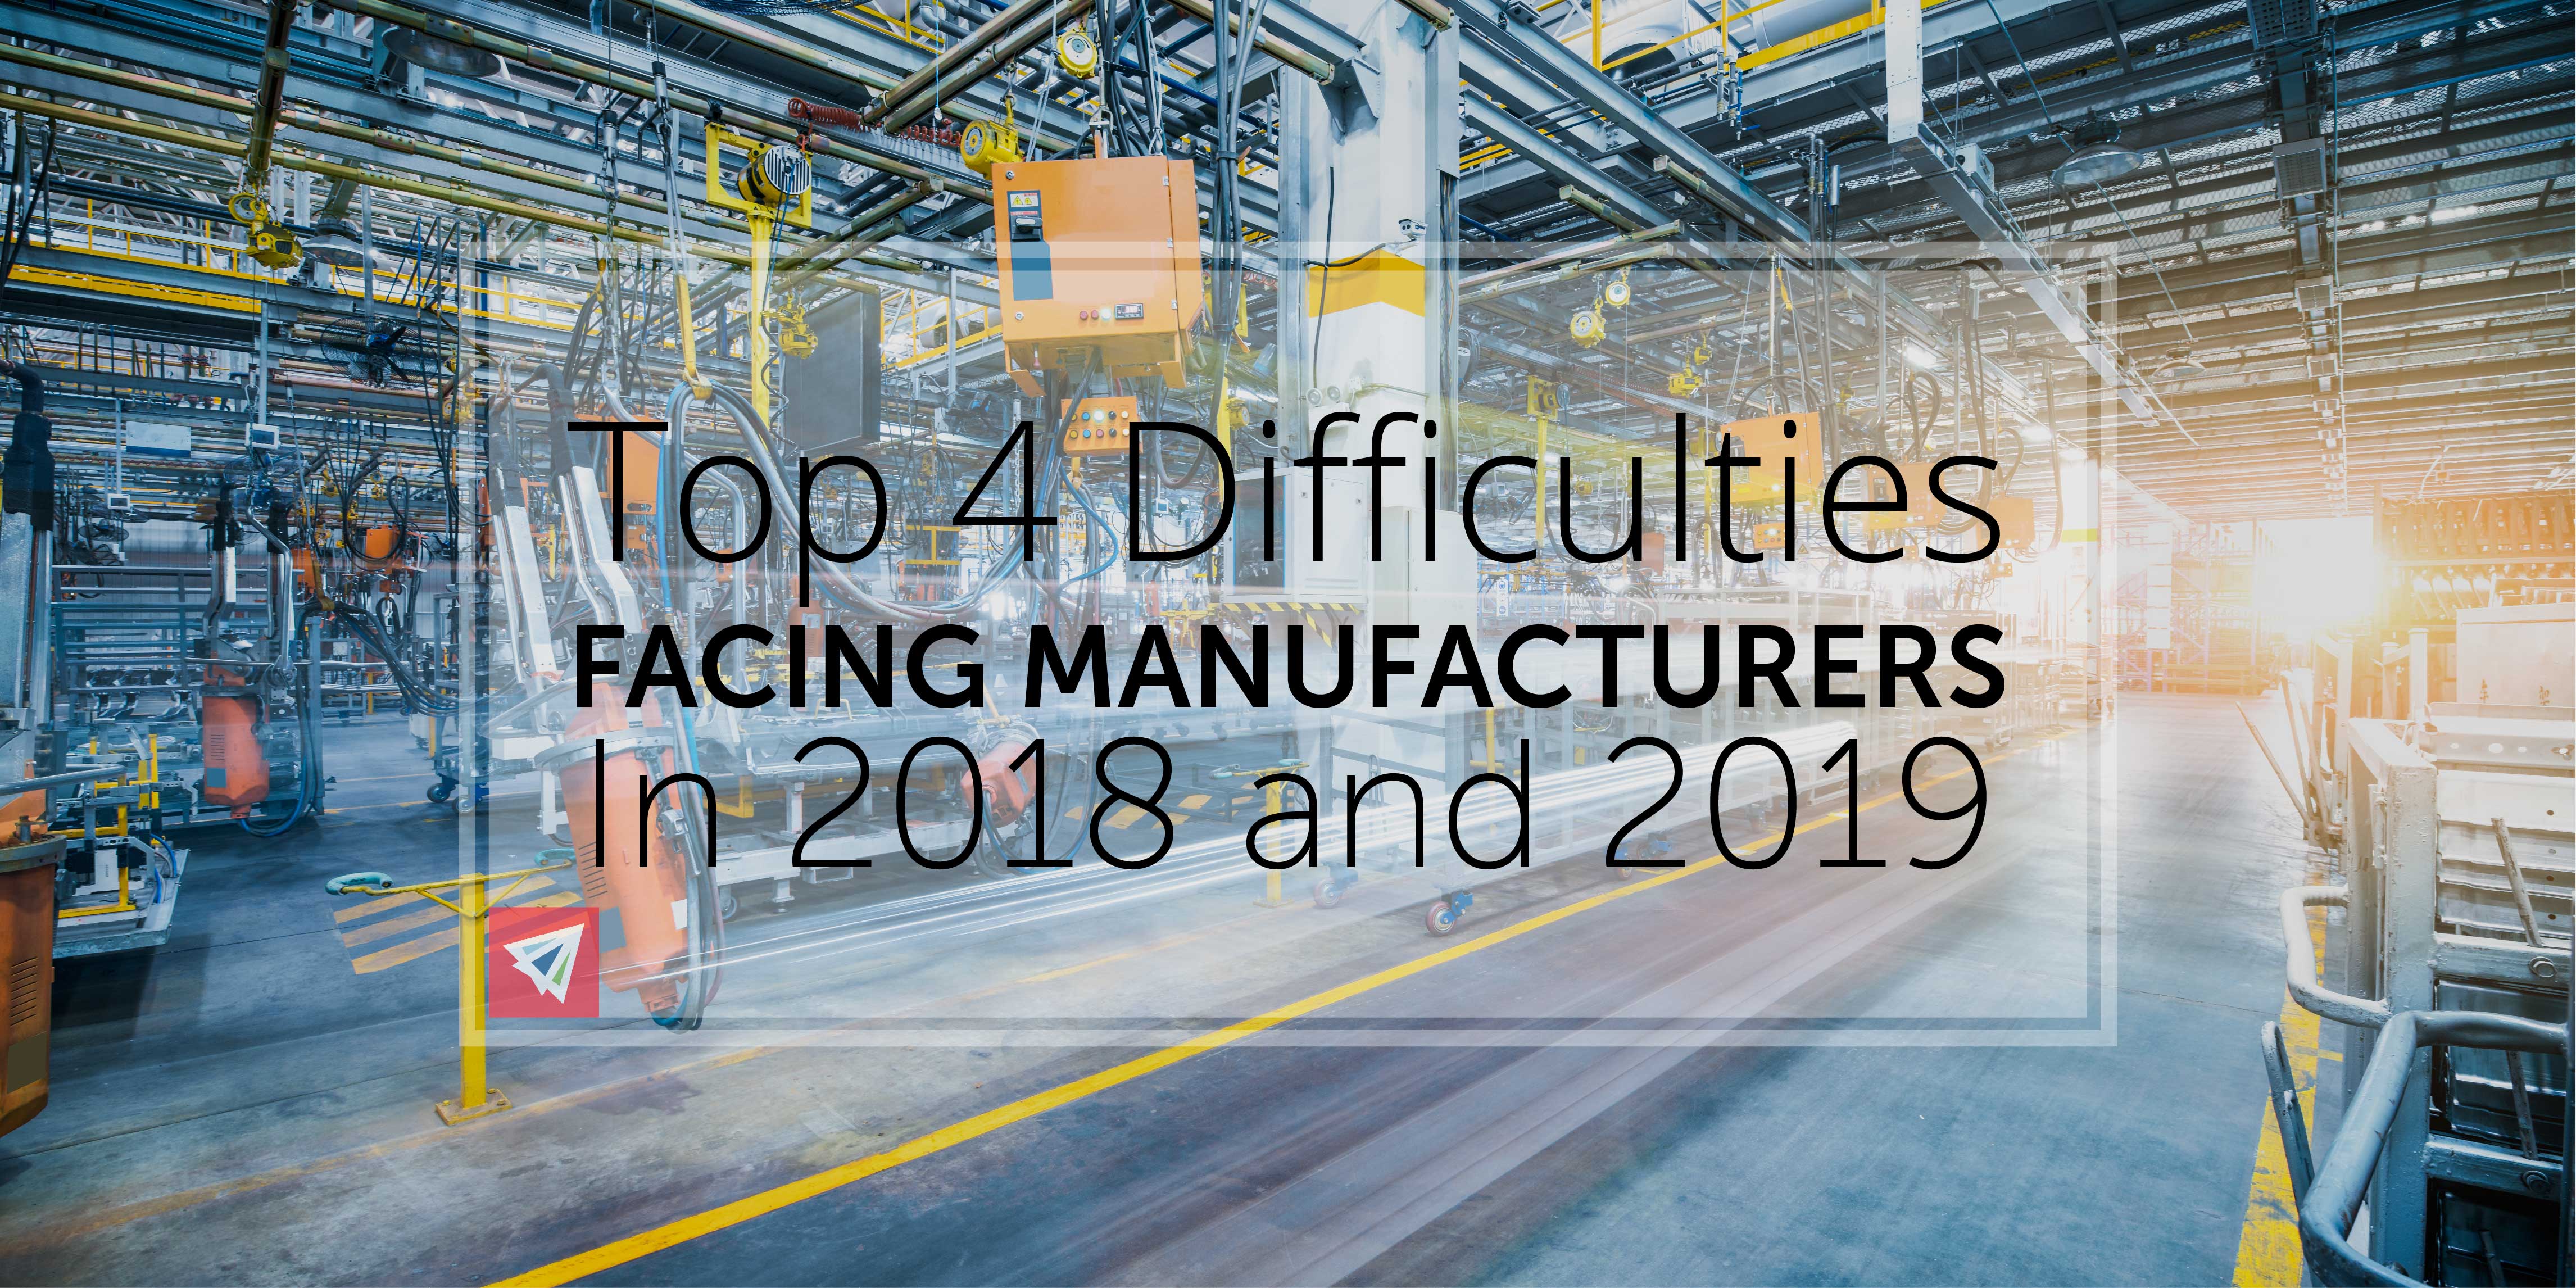 Top 4 Difficulties Facing Manufacturers in 2018 and 2019